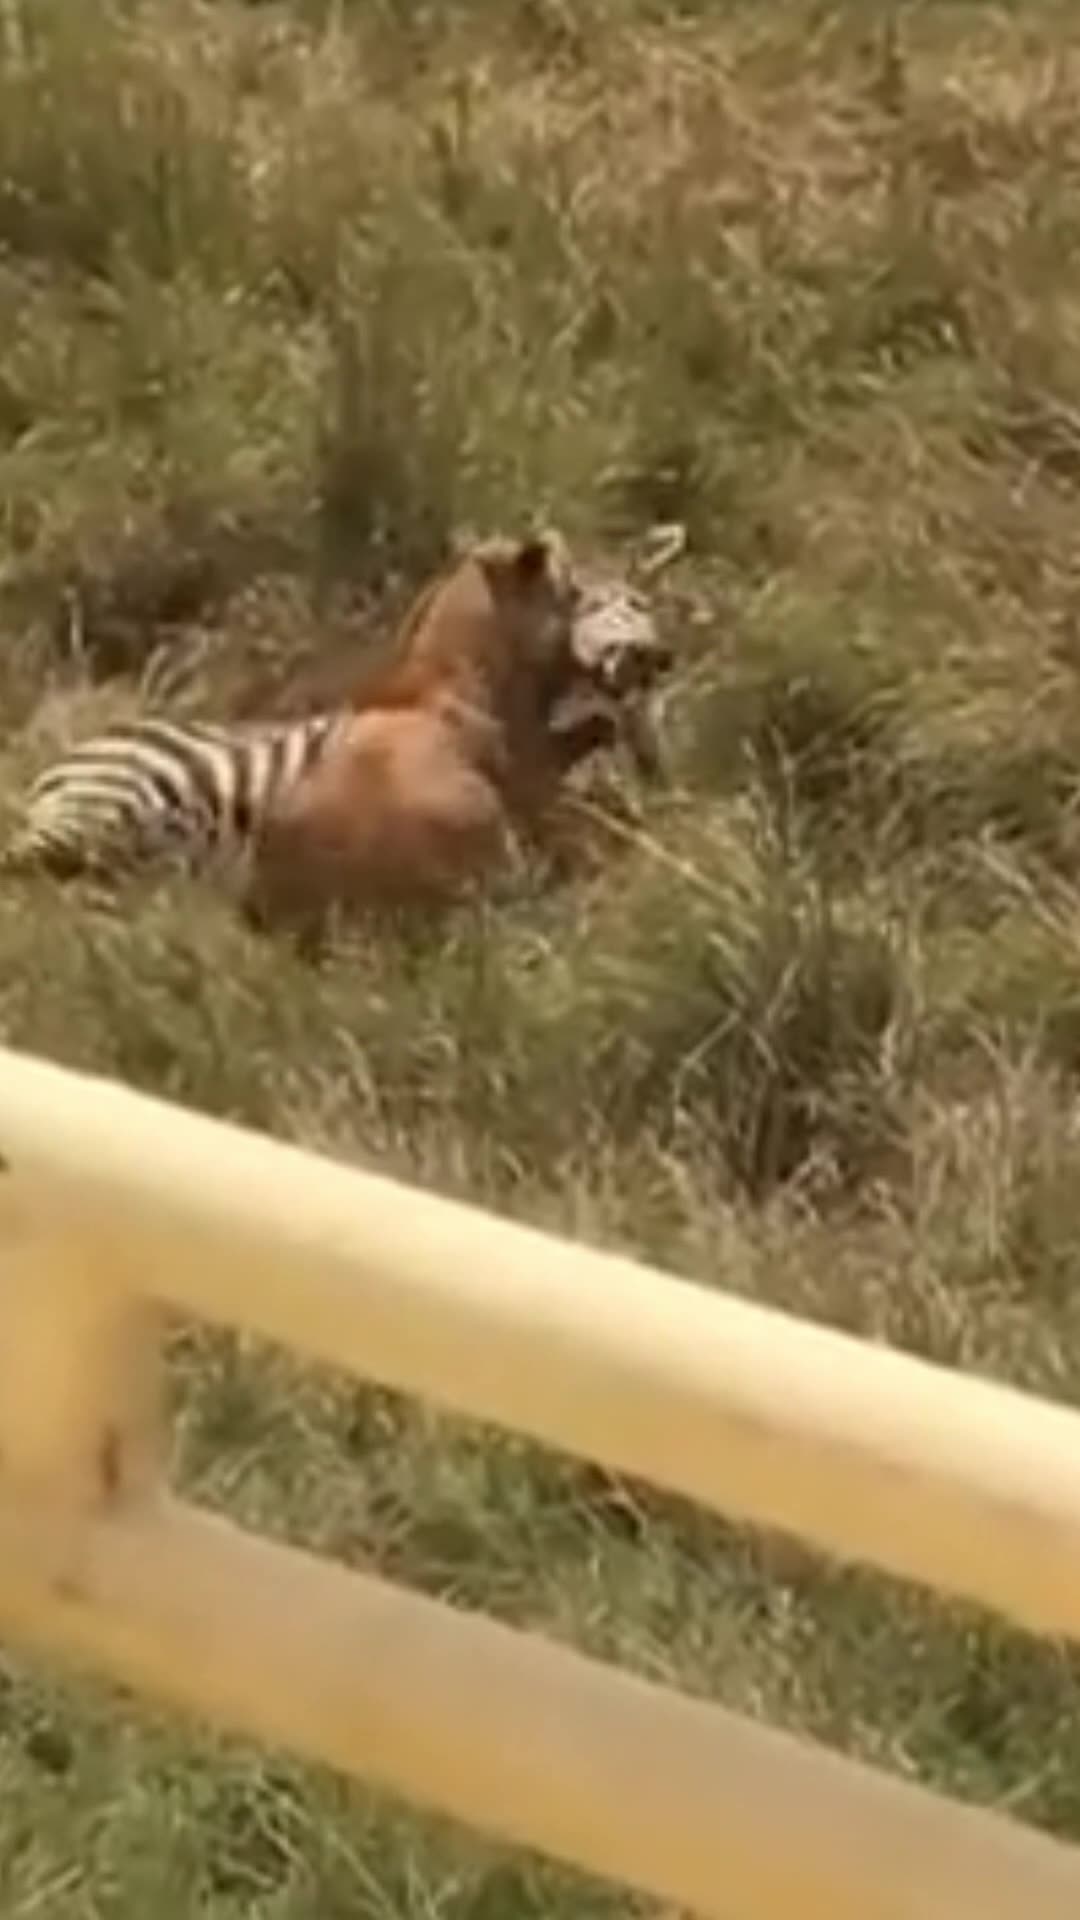 Zebra saves calf from lion jaws